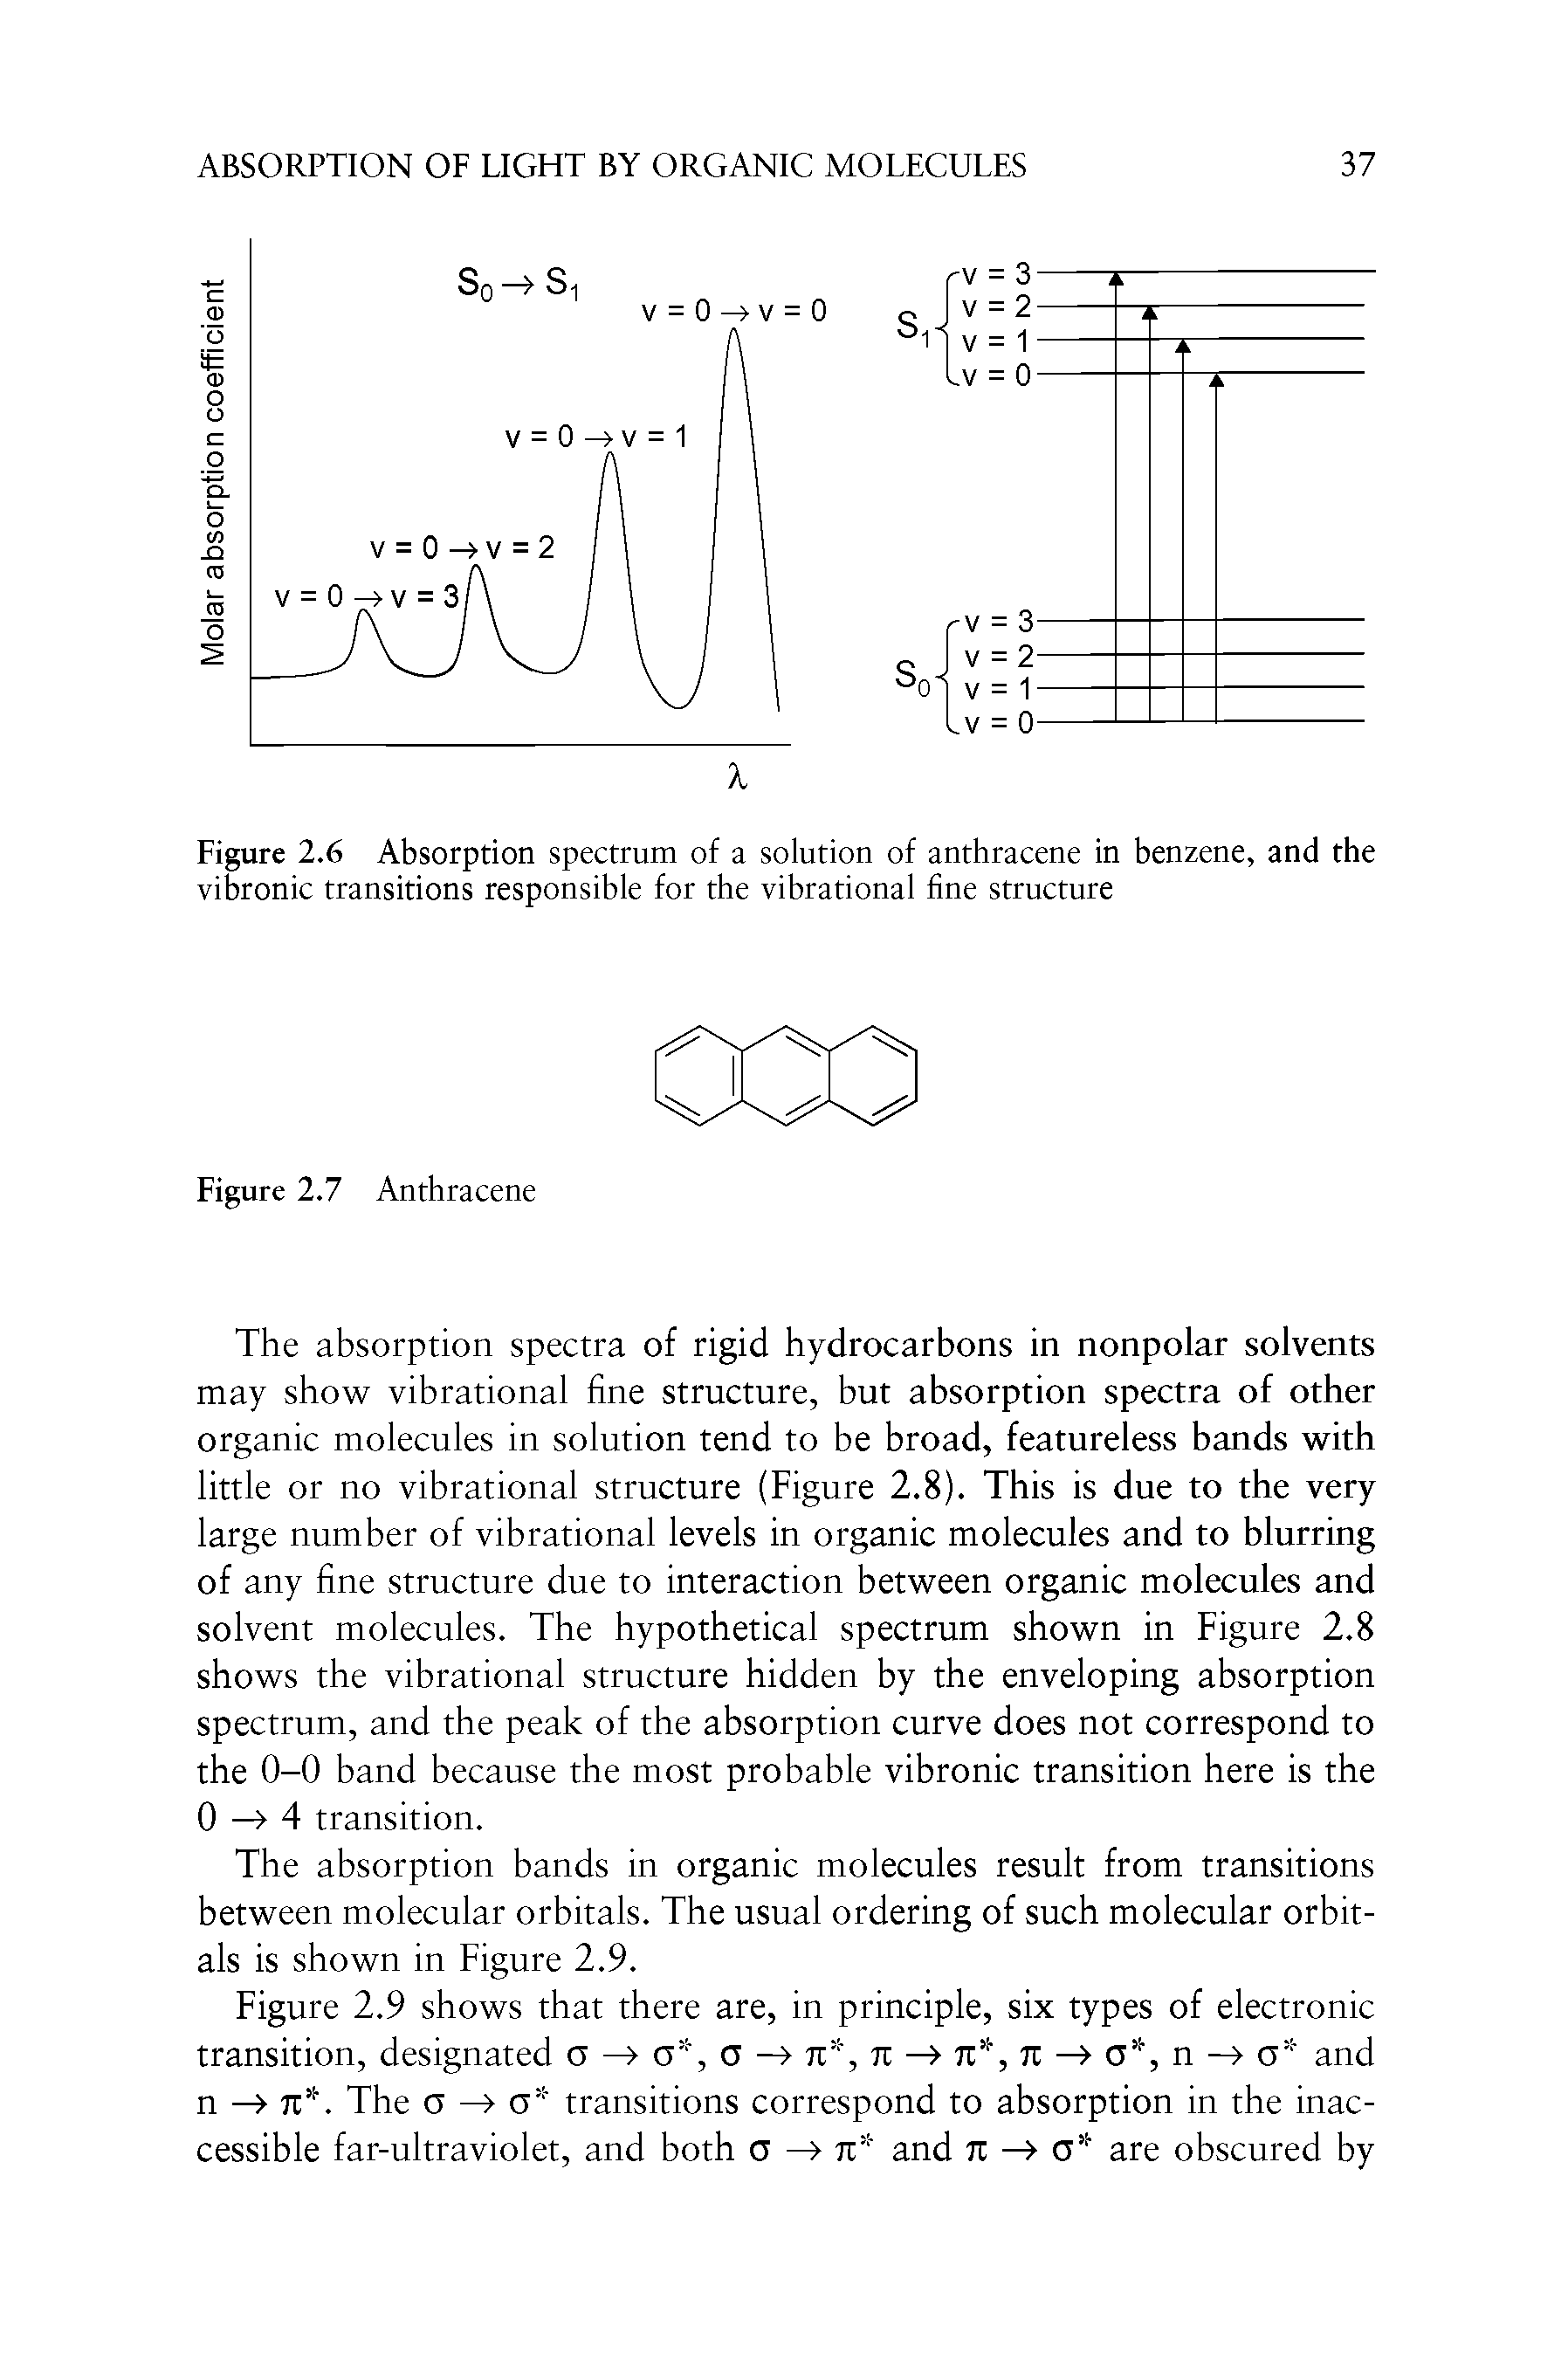 Figure 2.6 Absorption spectrum of a solution of anthracene in benzene, and the vibronic transitions responsible for the vibrational line structure...